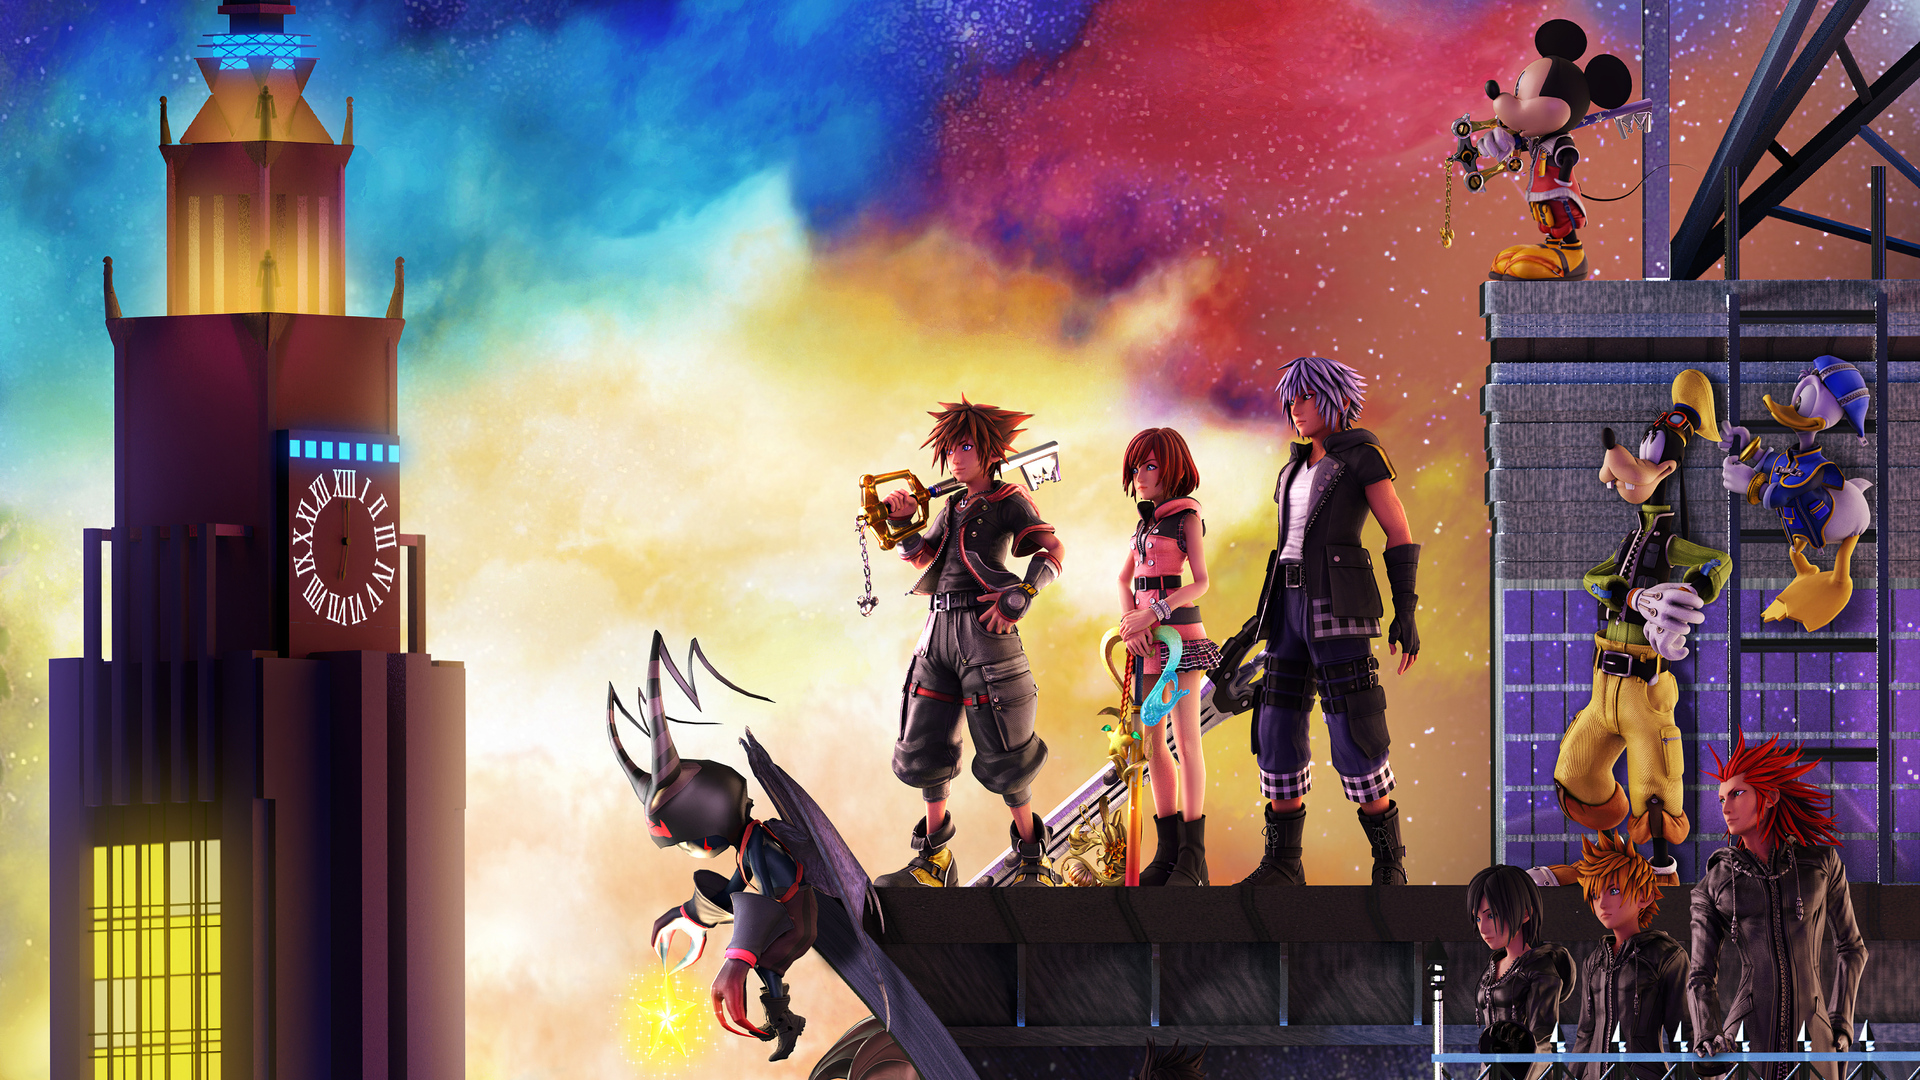 19x1080 Kingdom Hearts Iii Laptop Full Hd 1080p Hd 4k Wallpapers Images Backgrounds Photos And Pictures